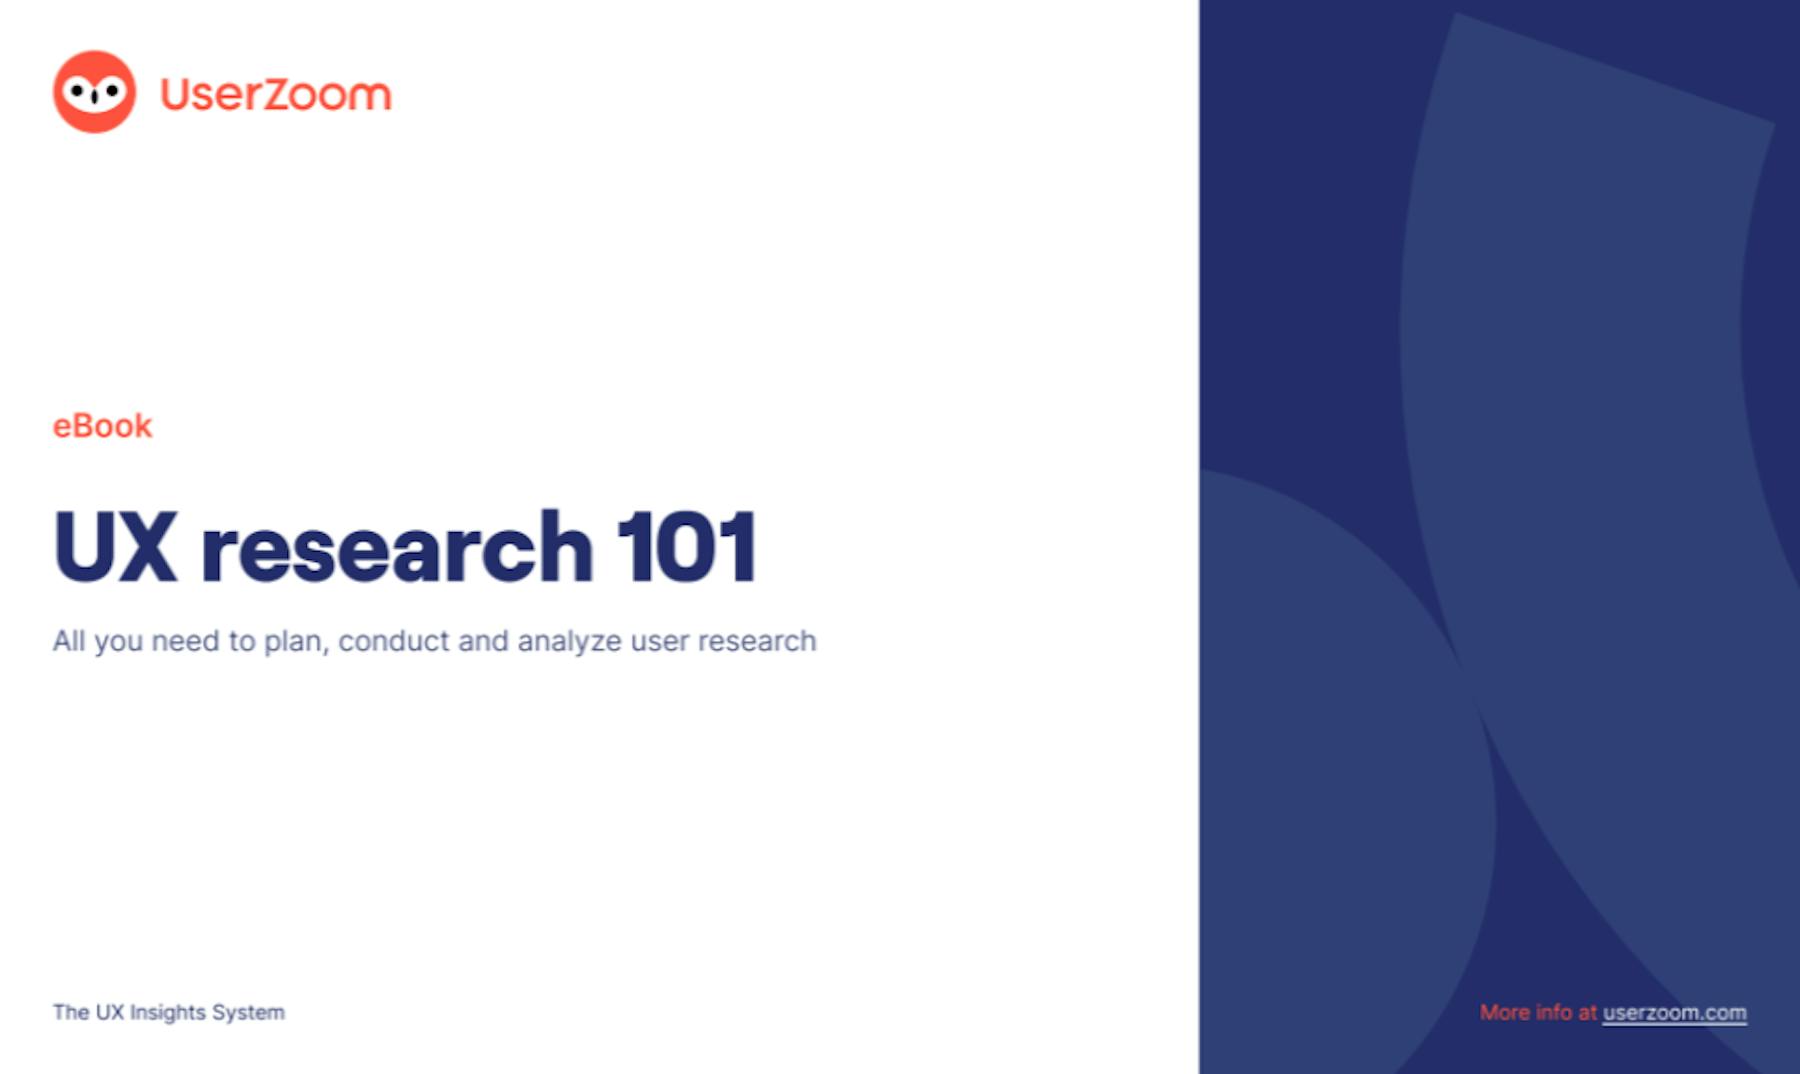 UX Research 101
Ebook
A comprehensive guide to planning, launching, managing, and analyzing UX research projects.